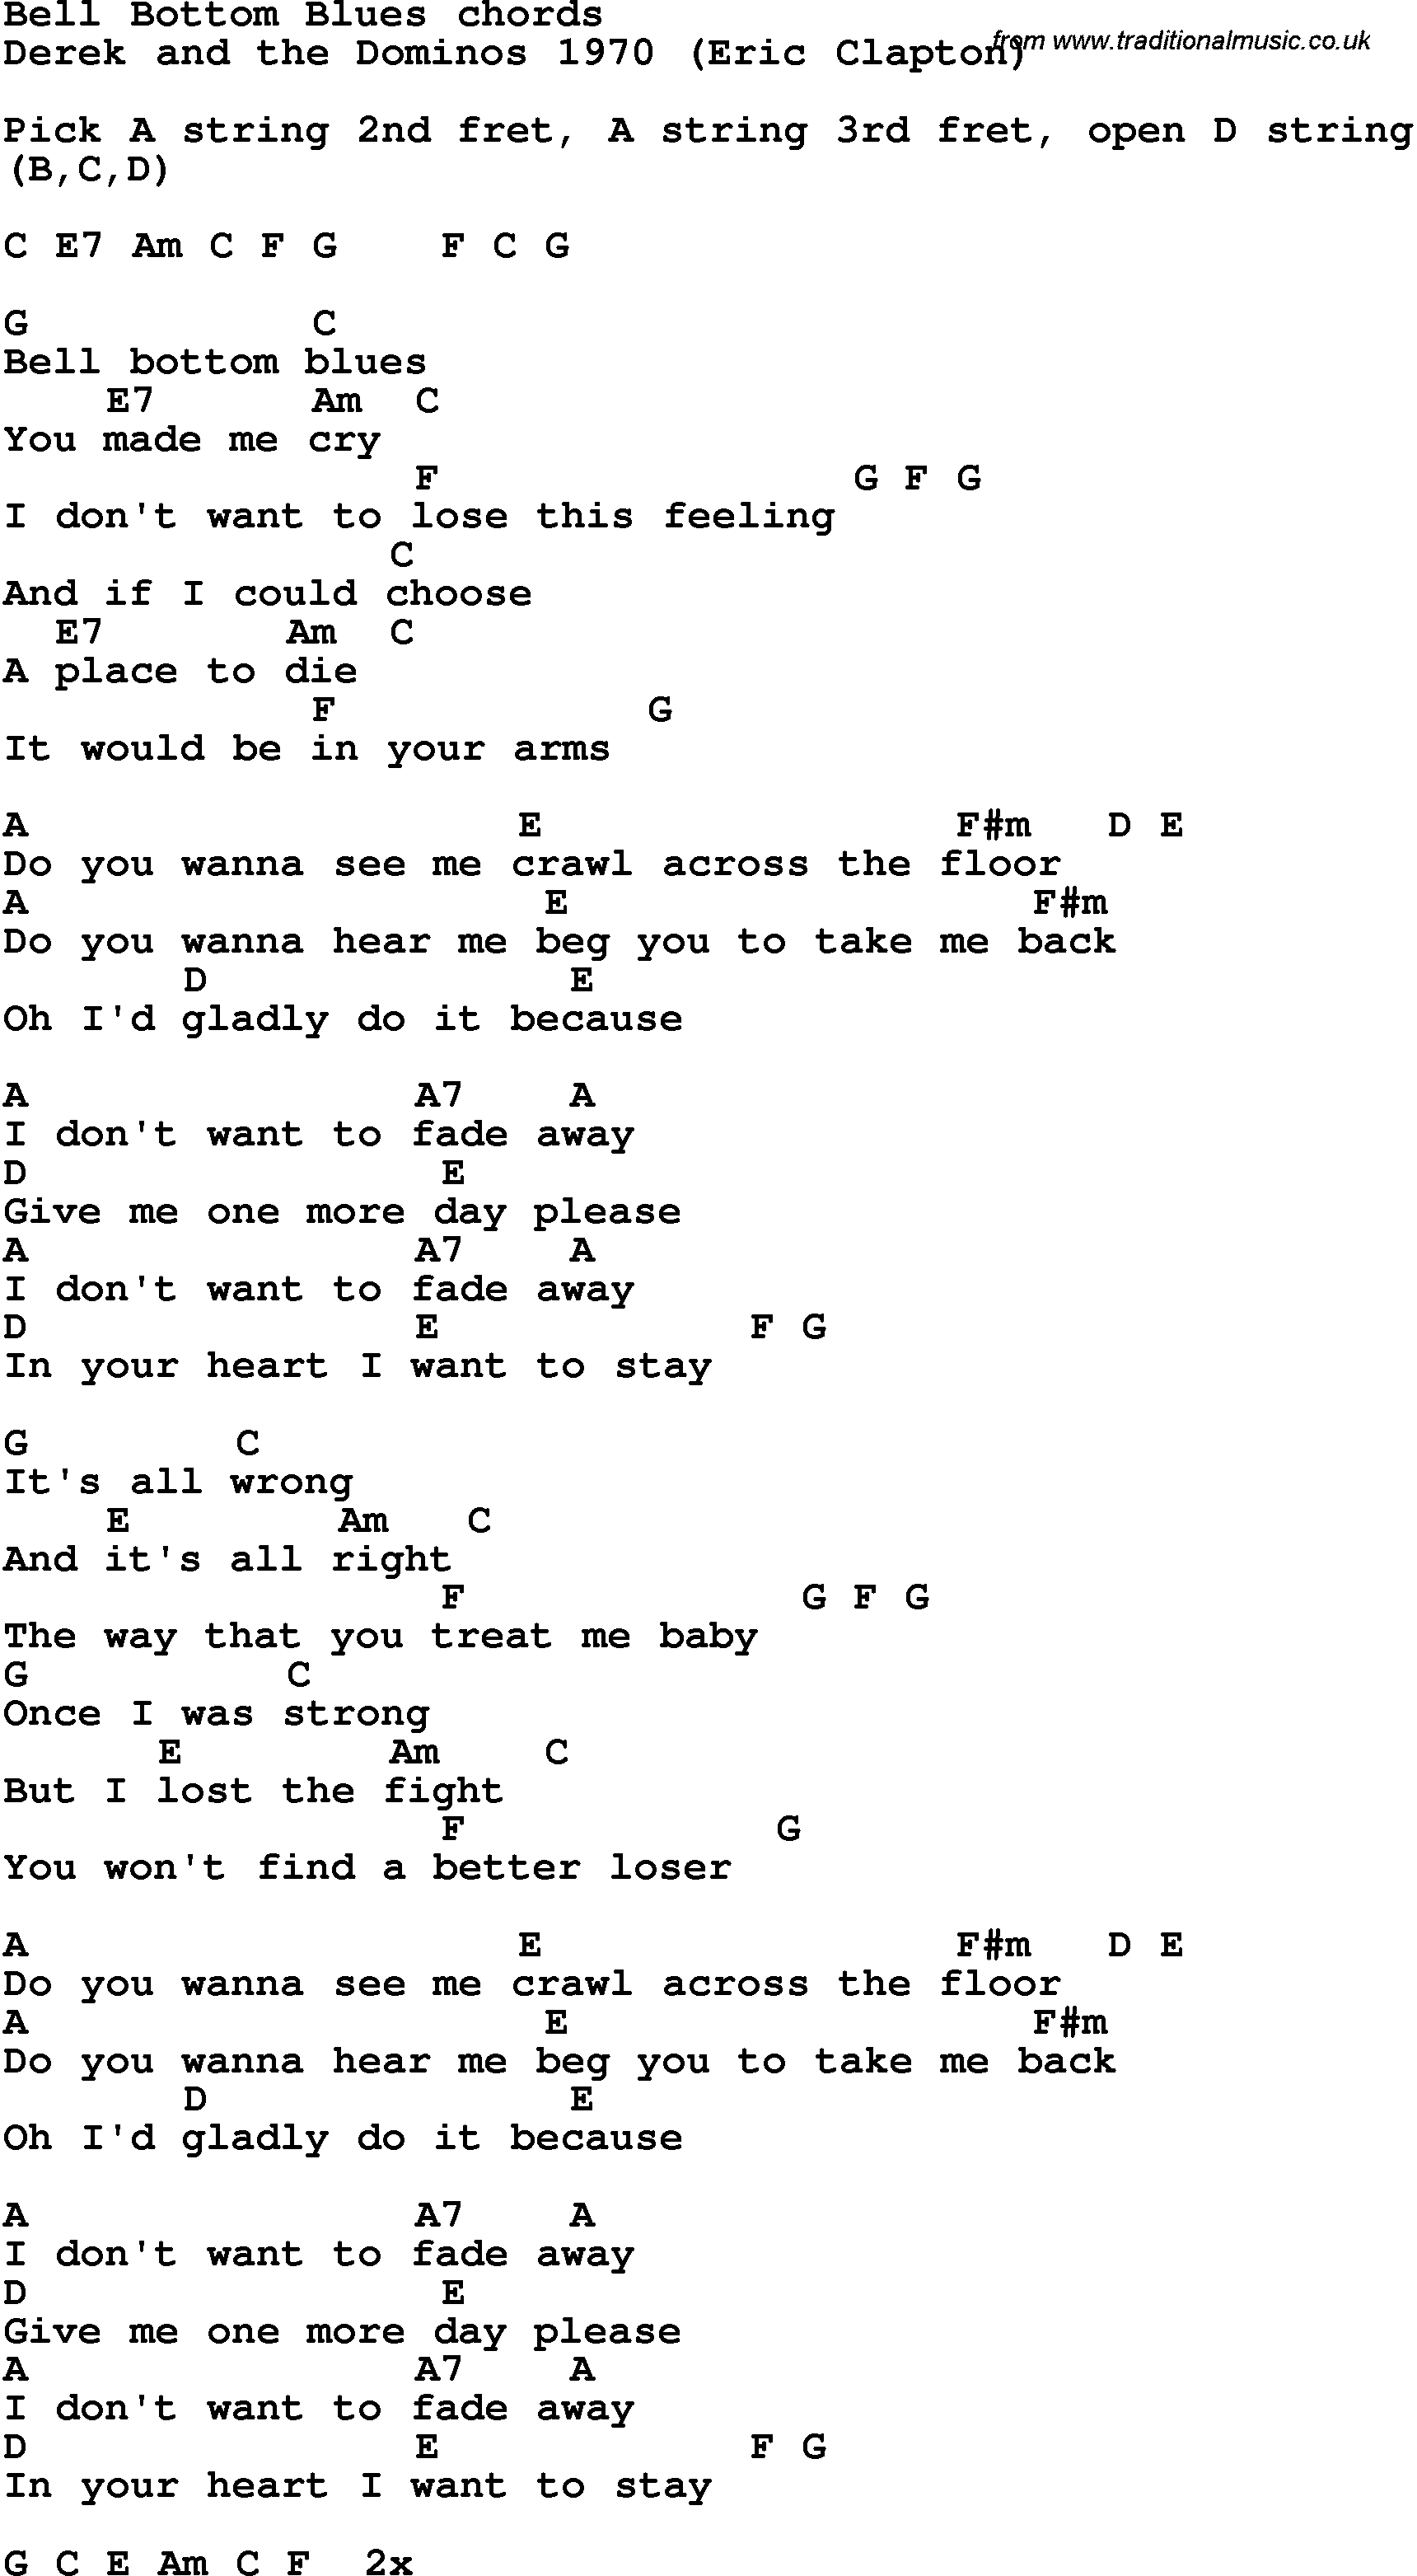 Song Lyrics with guitar chords for Bell Bottom Blues